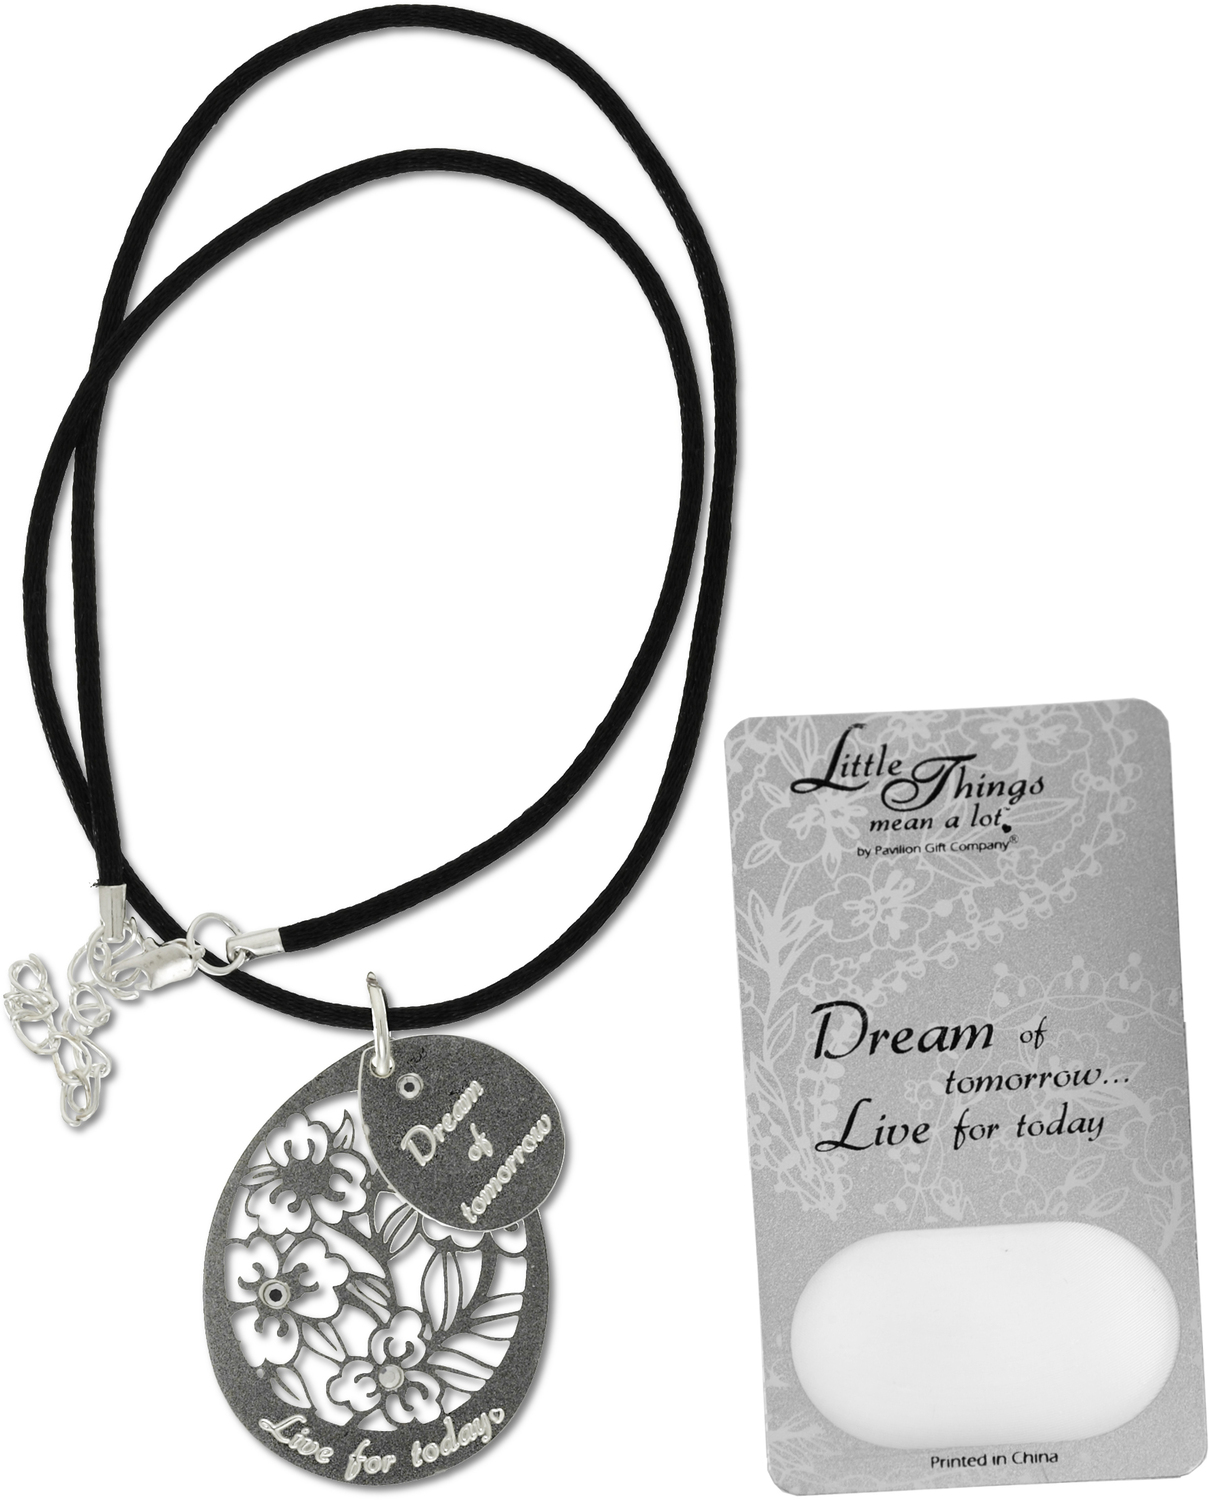 Dream Necklace by Little Things Mean A Lot - Dream Necklace - With 1.5" Teardrop Pendant